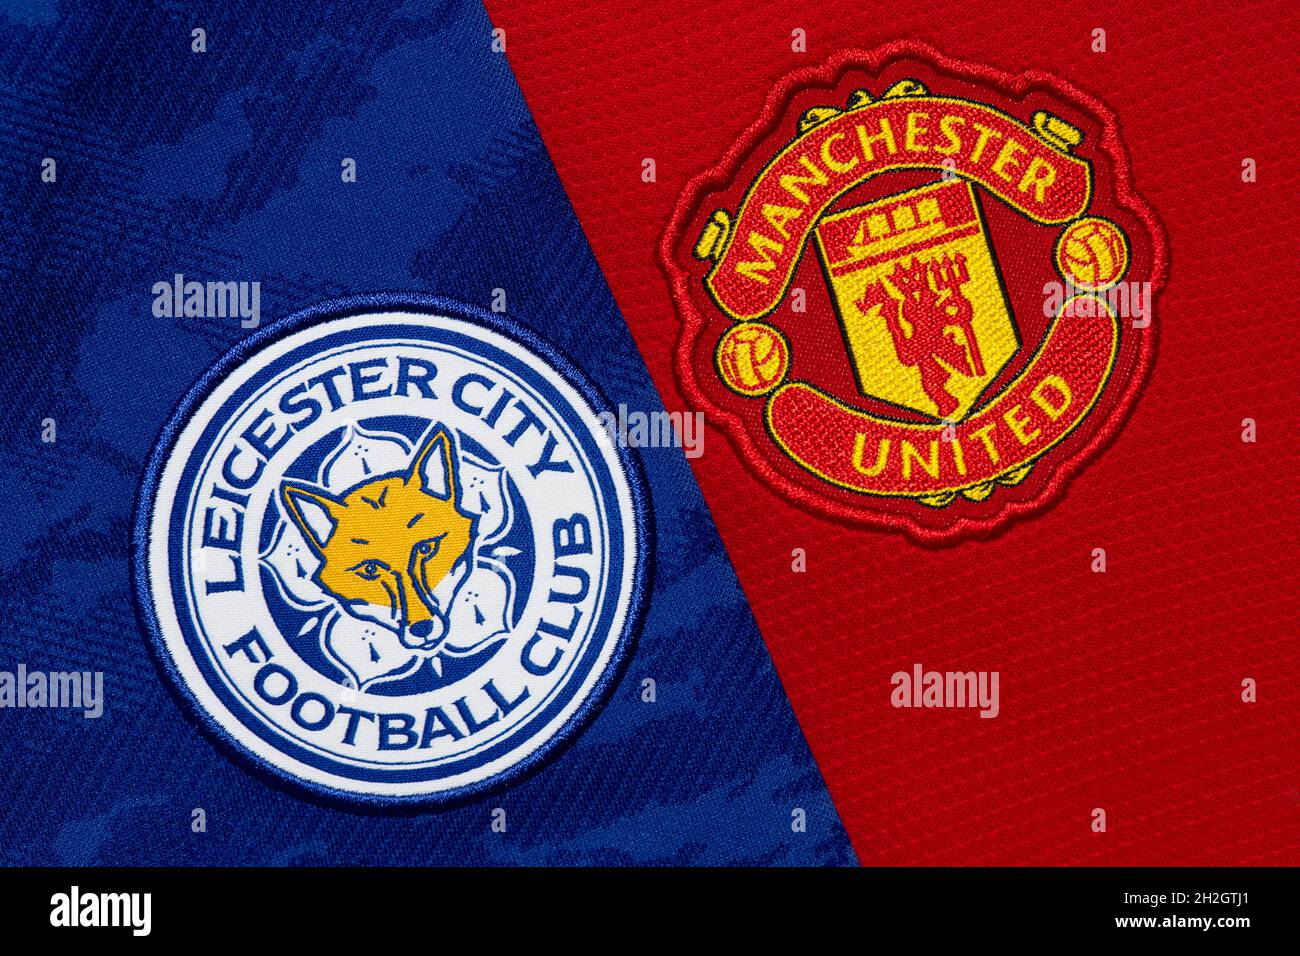 Close up of Leicester and Man United club crest. Stock Photo